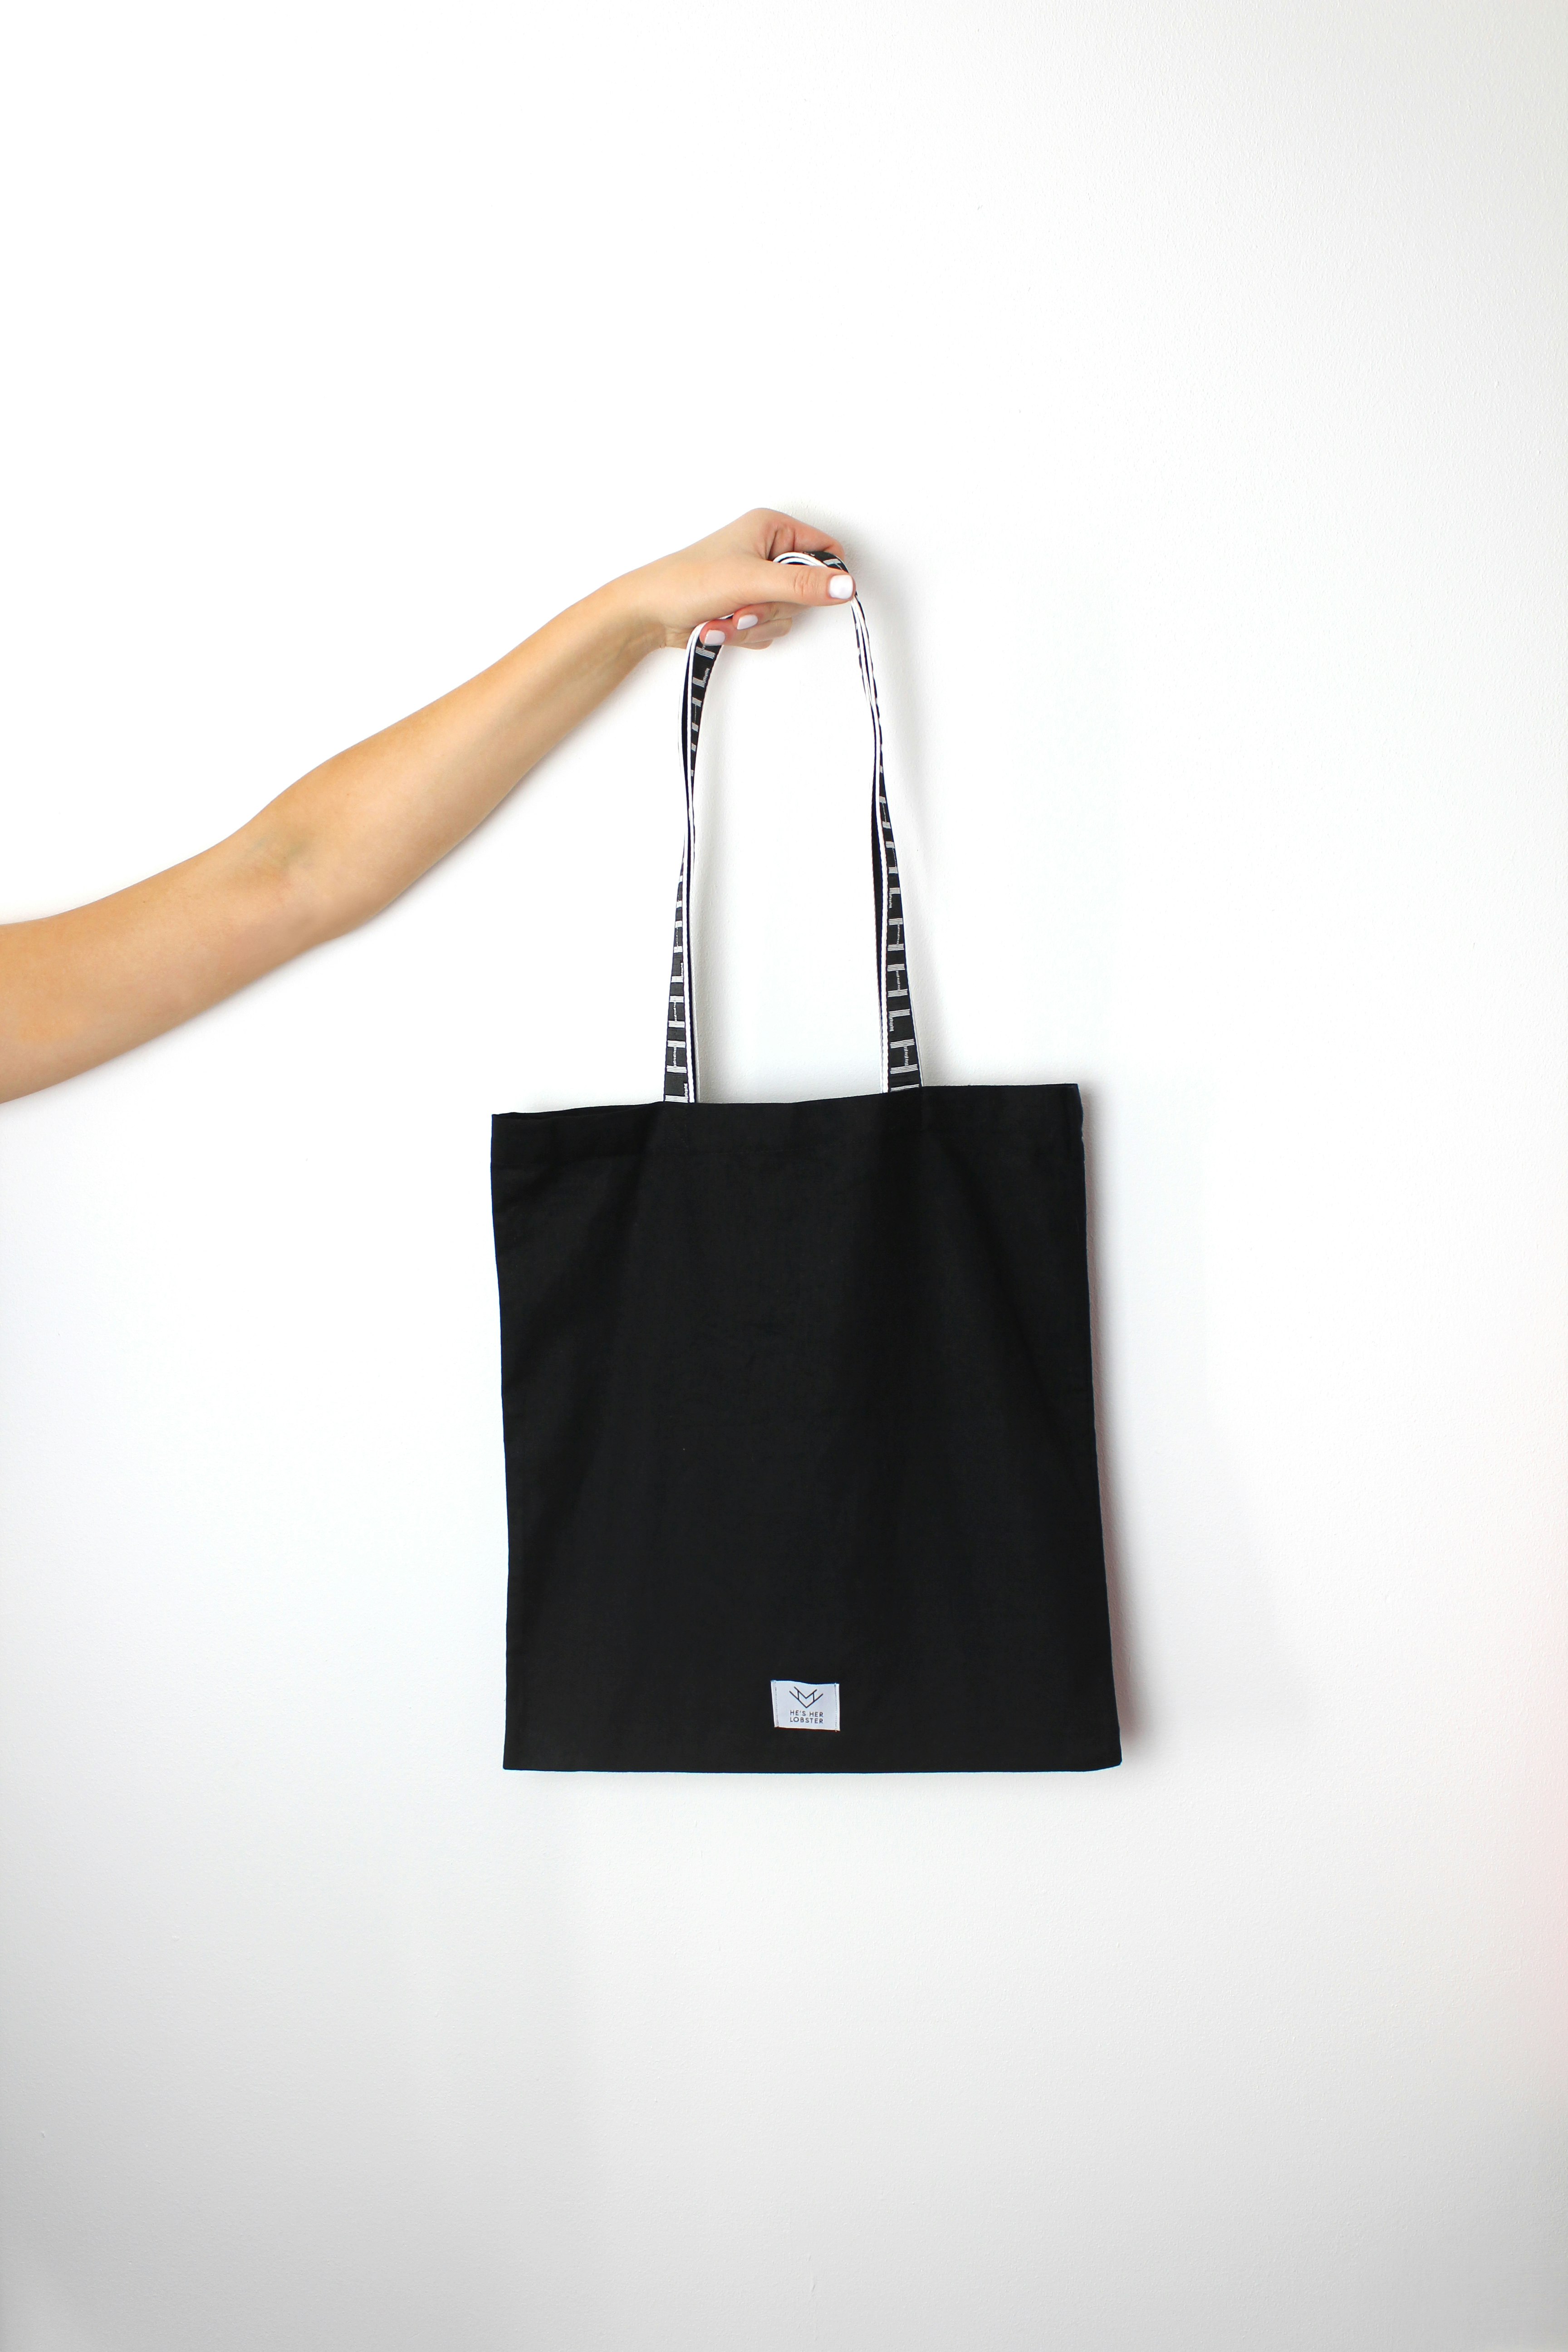 Use Cotton Tote Bags